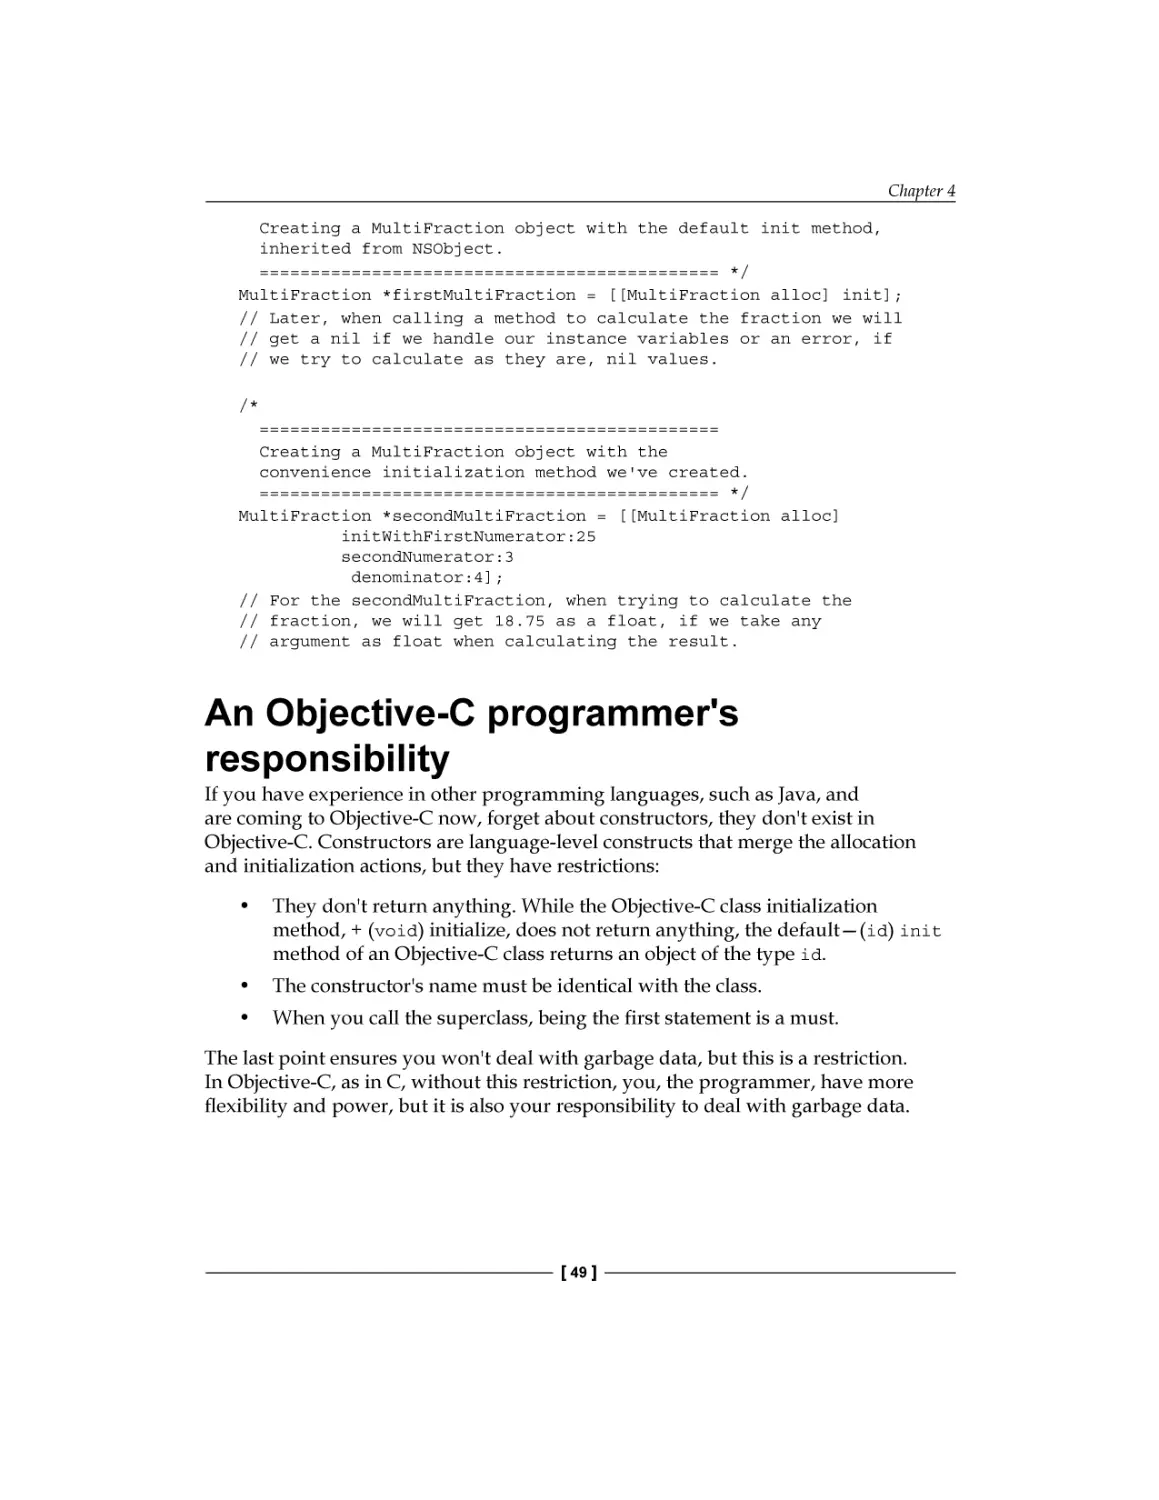 An Objective-C programmer's responsibility